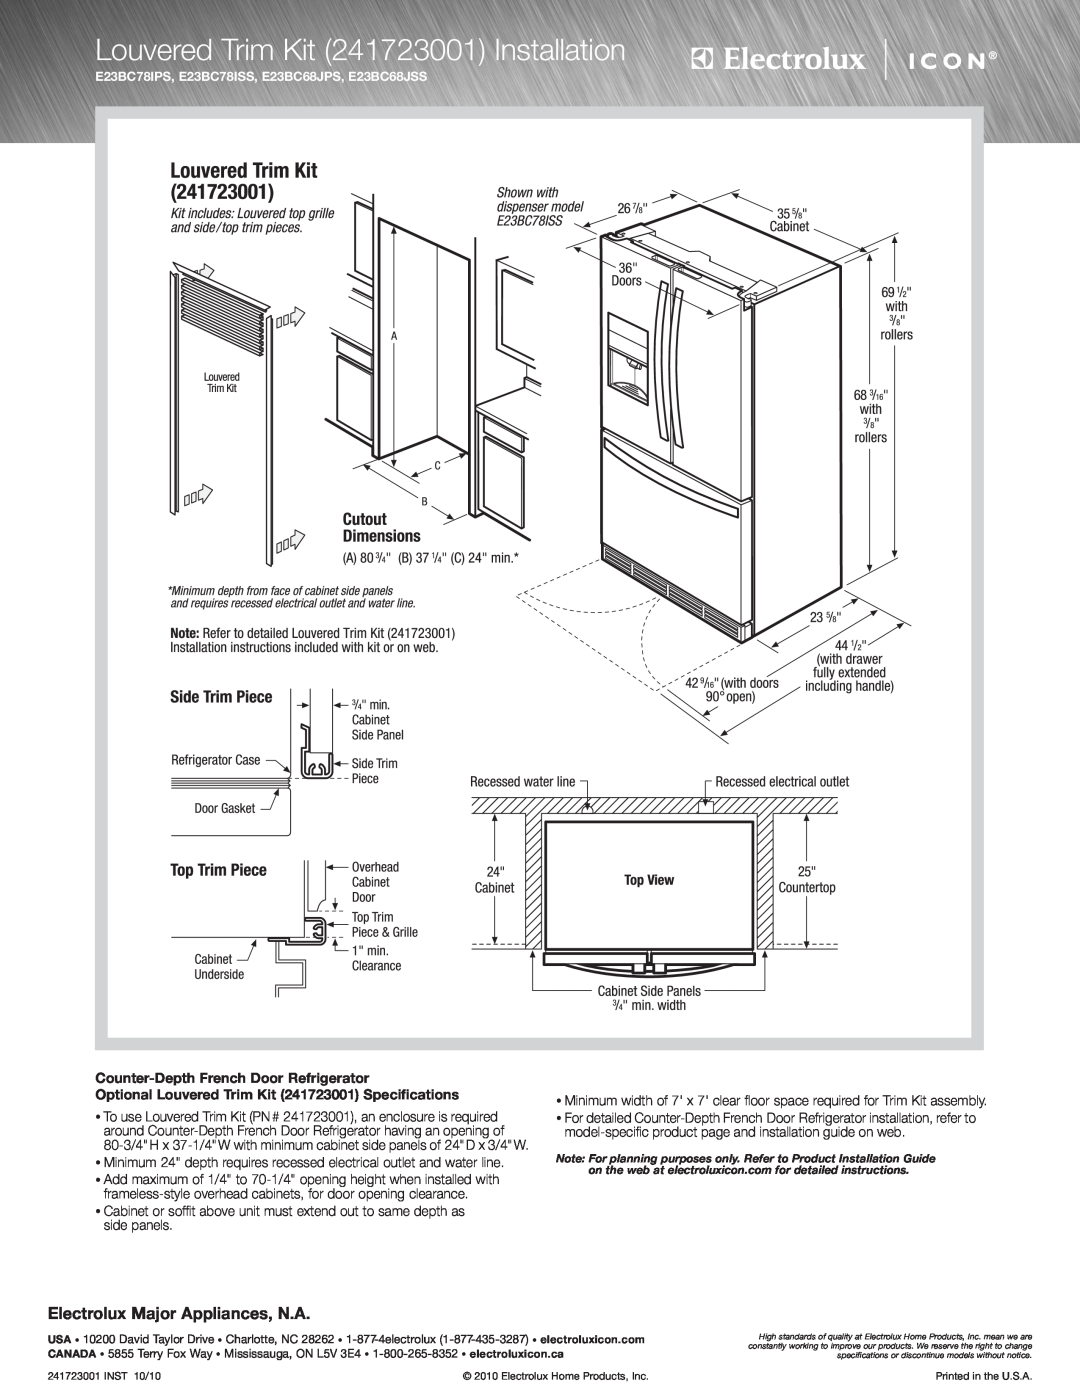 Electrolux E23BC78IPS specifications Louvered Trim Kit 241723001 Installation, Counter-Depth French Door Refrigerator 